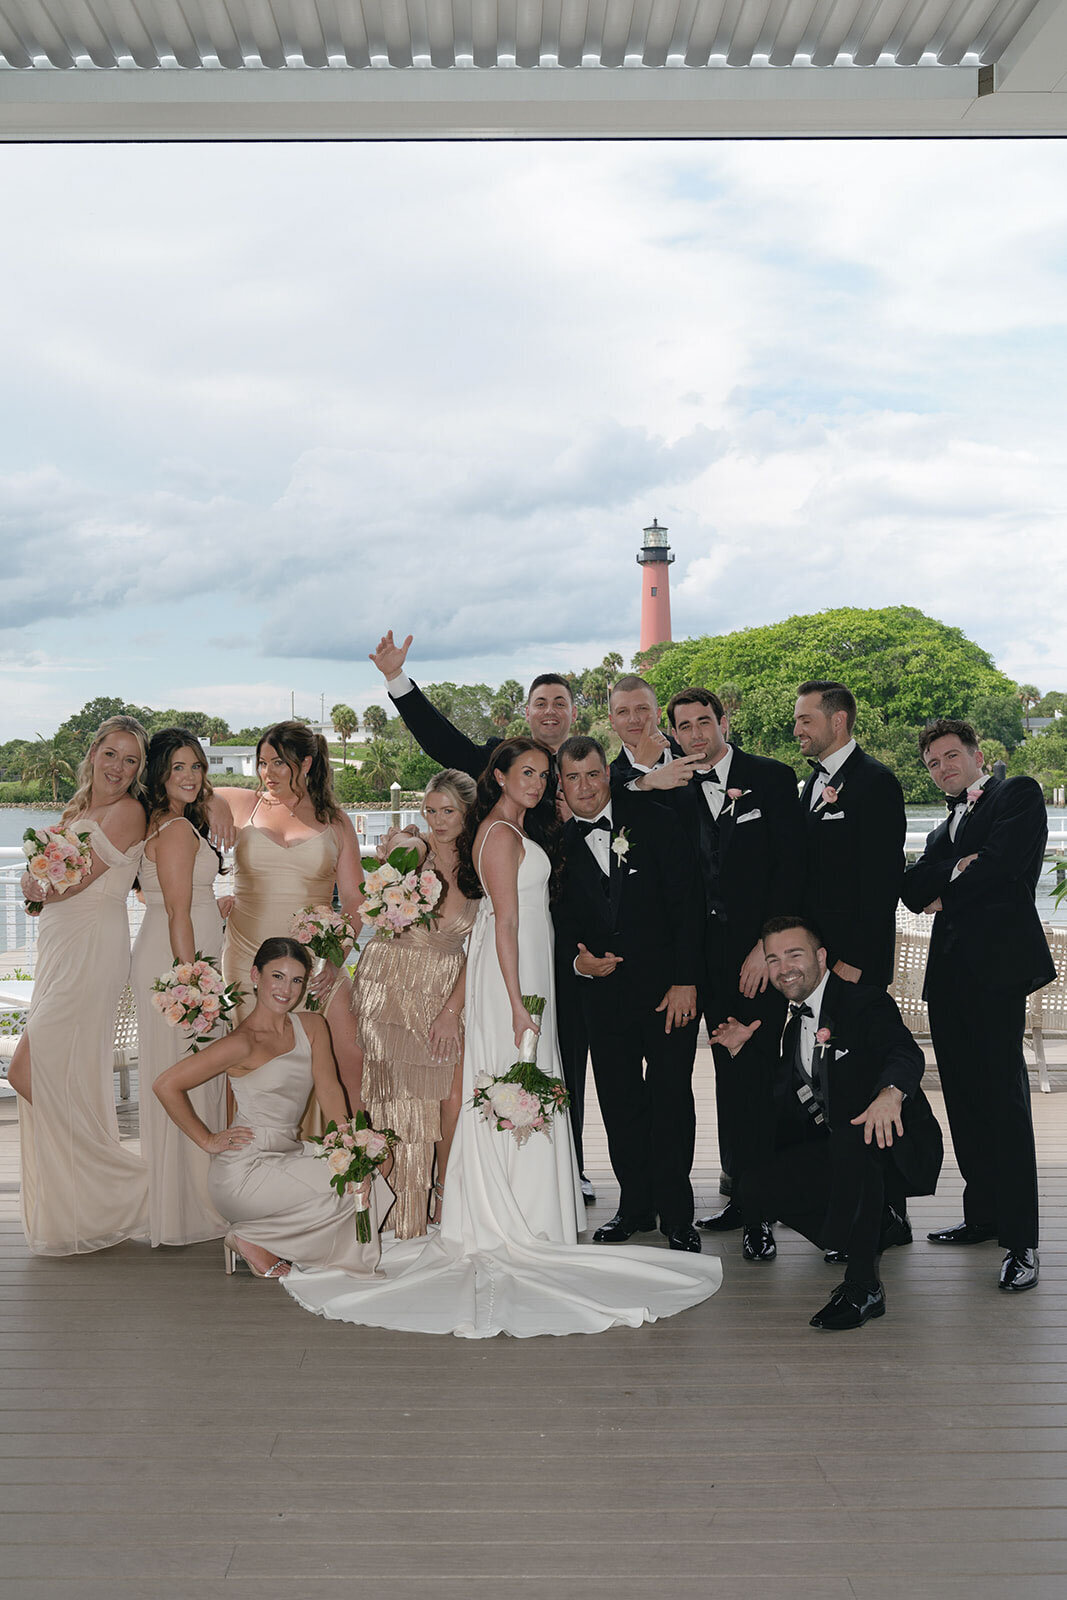 Bride and groom with bridesmaids and ushers at an outdoor wedding ceremony